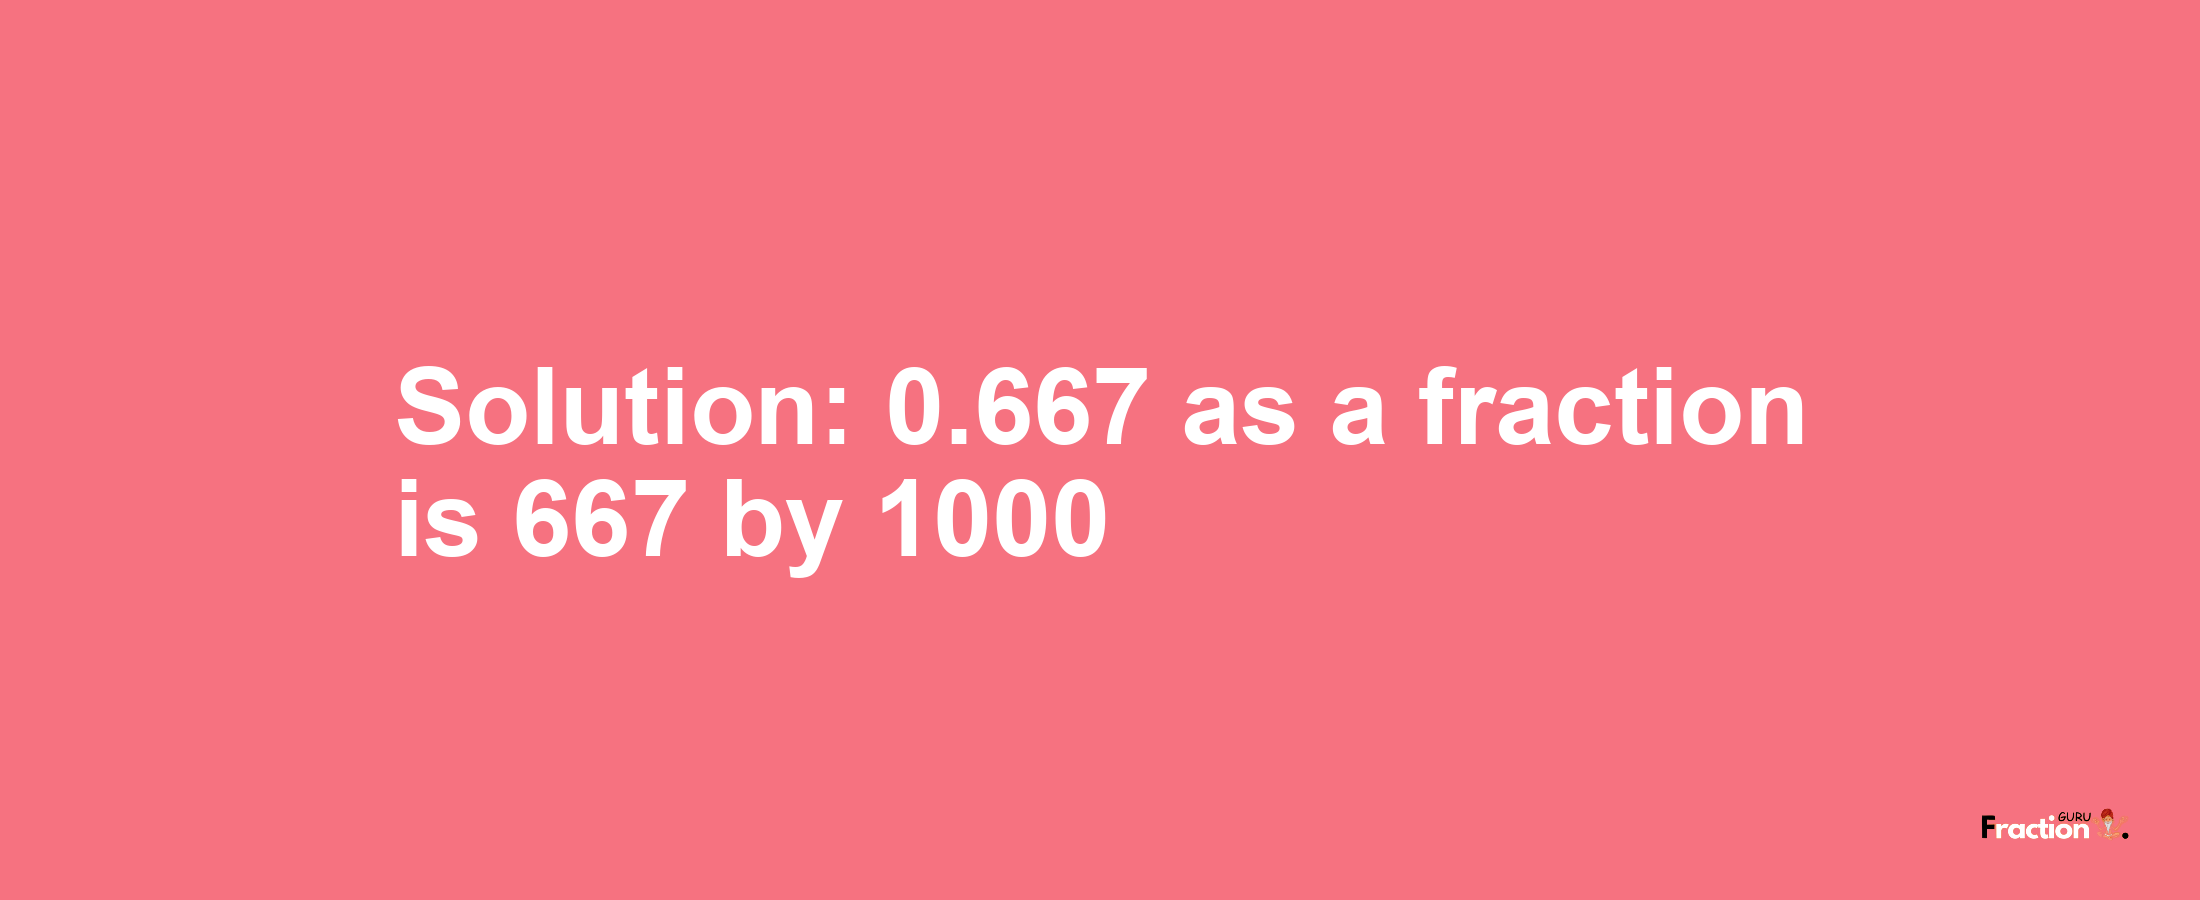 Solution:0.667 as a fraction is 667/1000